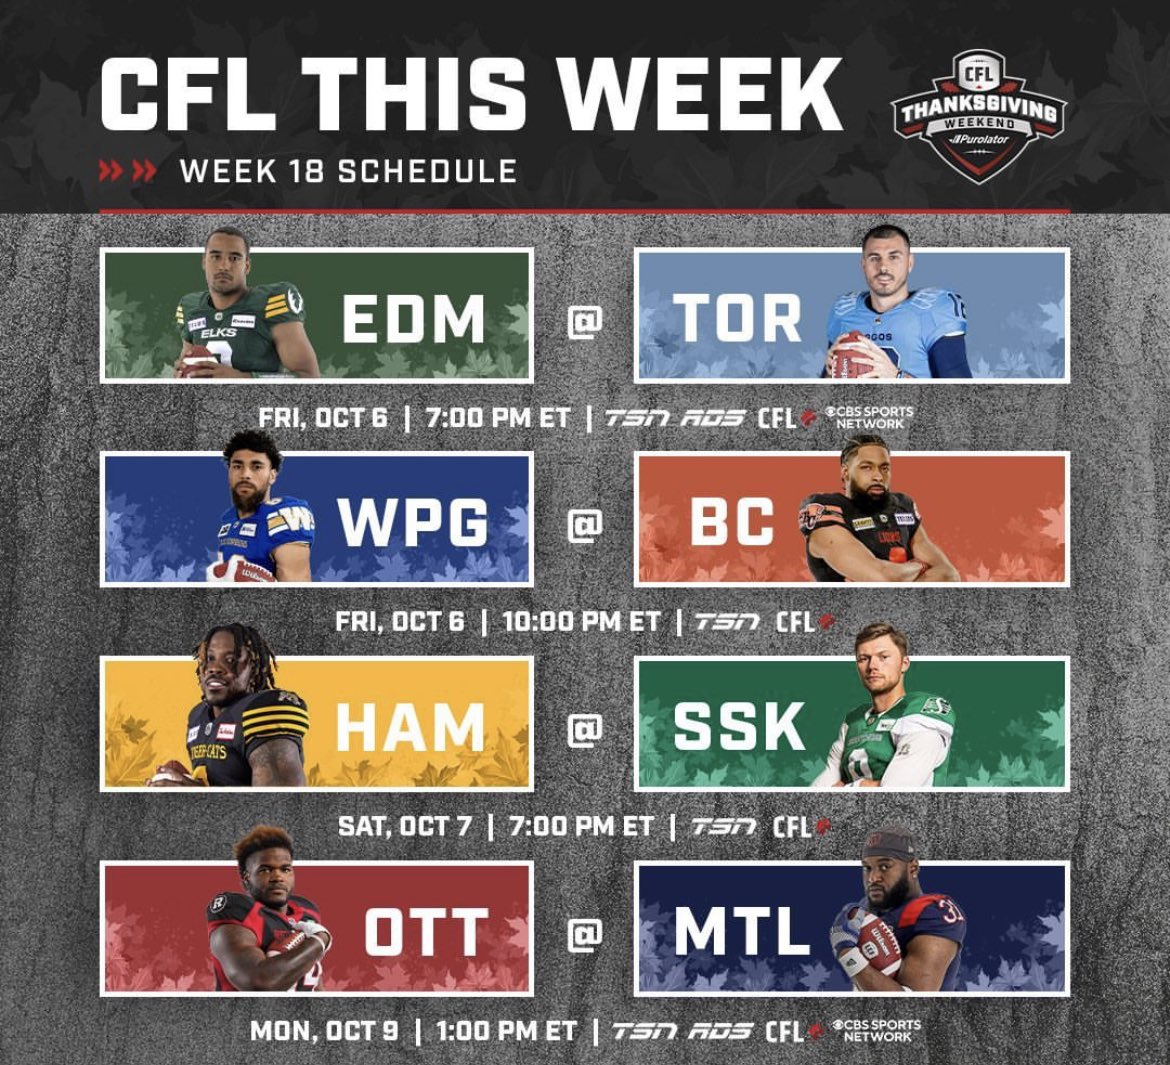 Canadian Football Week 18. Who’s your pick for this weekend!
#cfl #canadianfootball #argos #edmontonelks #bclions #alouettes #sports